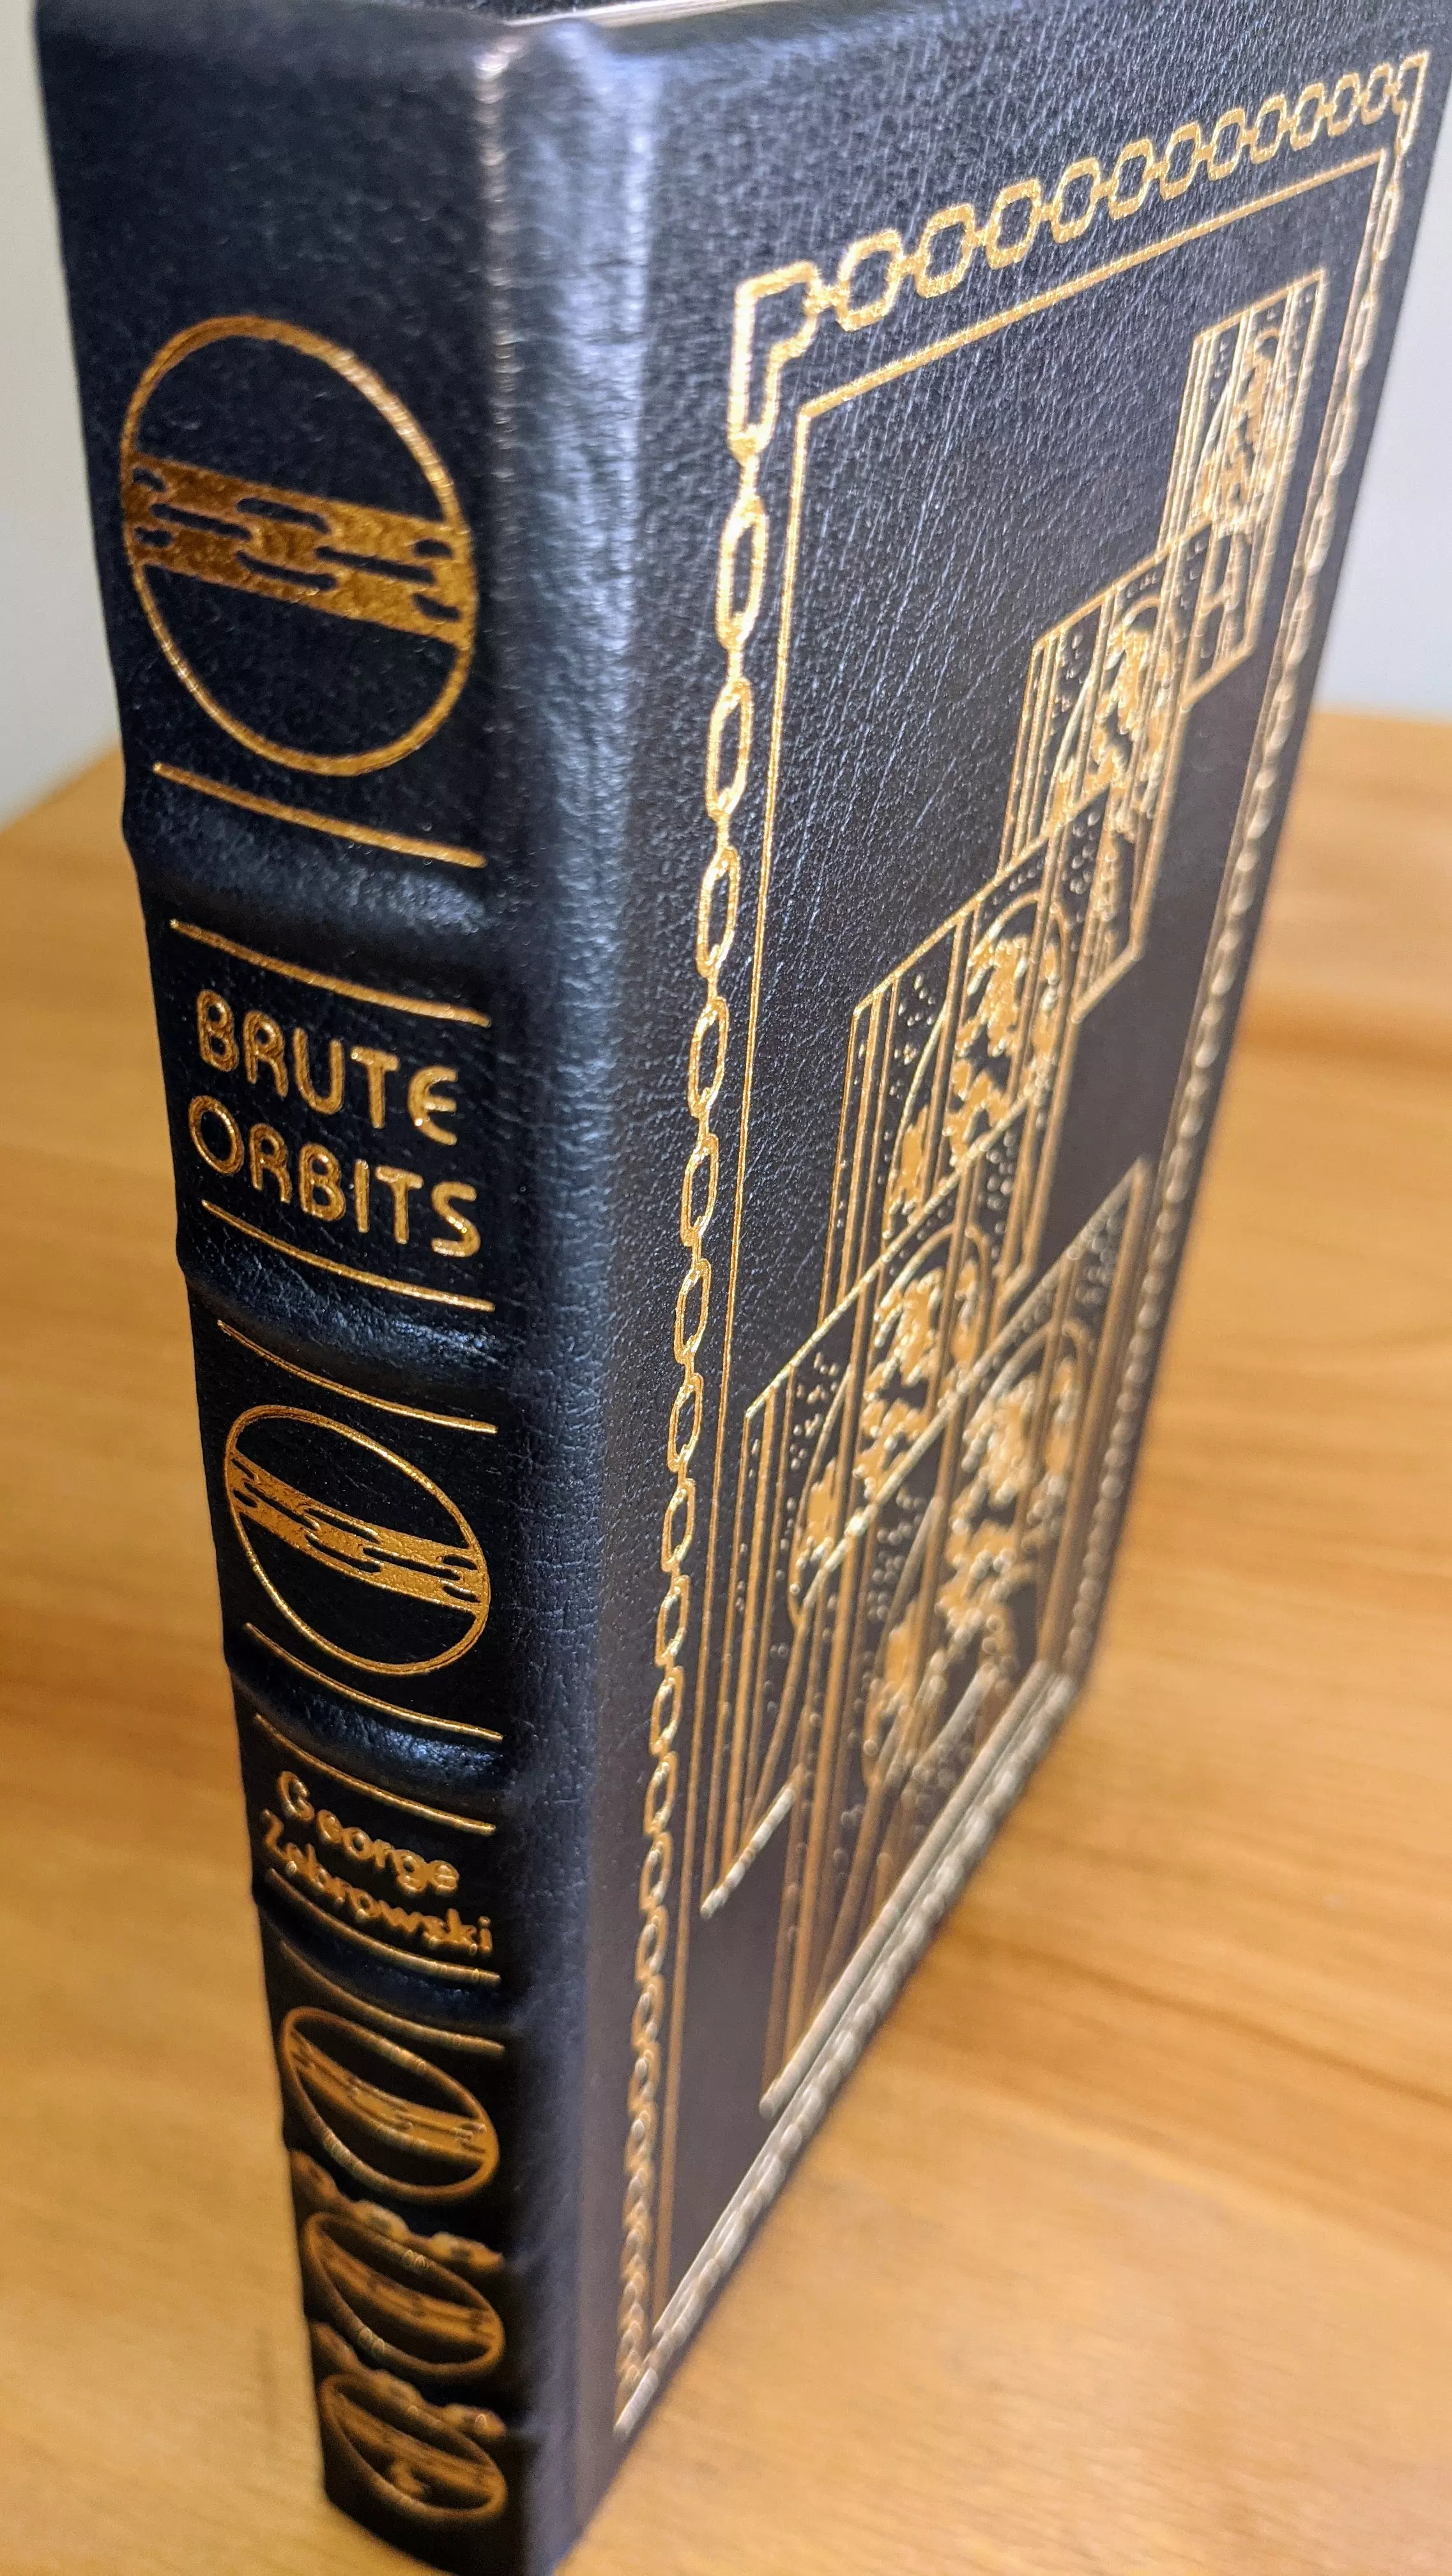 Stunning Dark Navy Blue Leather Bound hardback book with hubbed spine, cover artwork in 22kt gold, printed on archival paper with gold gilded edges, smyth sewing & concealed muslin joints
	  - original artwork by Bob Eggleton